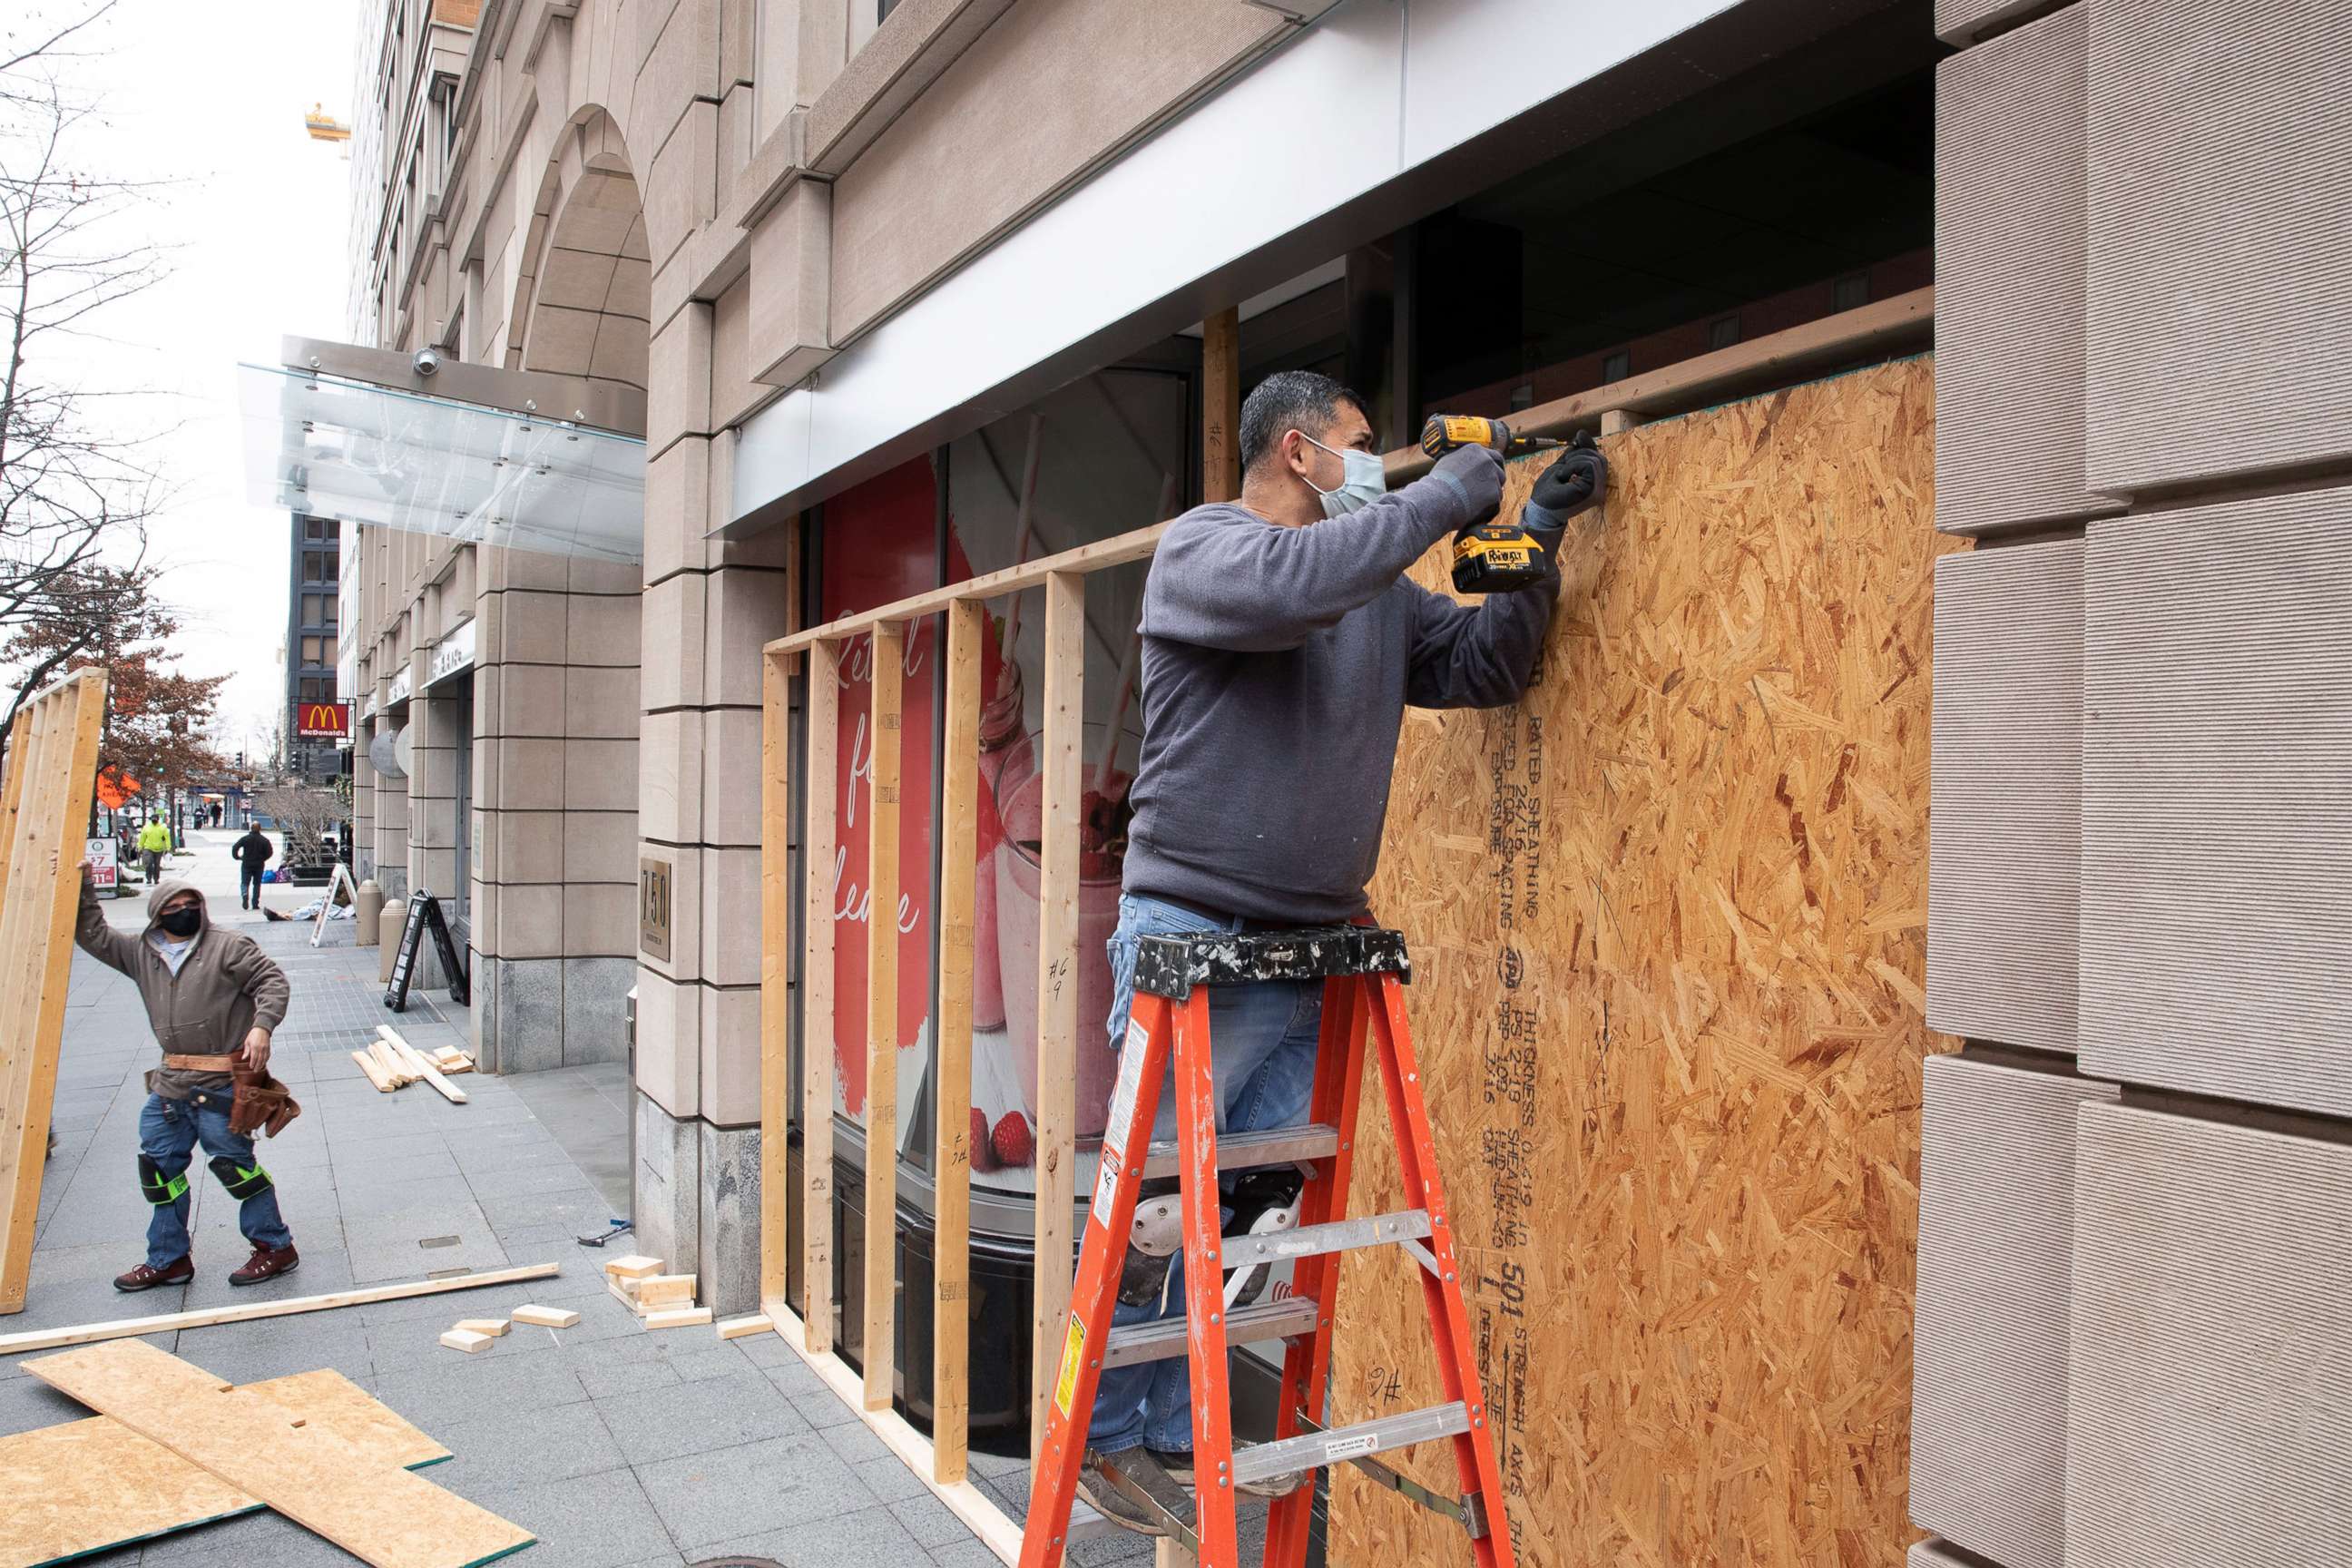 PHOTO: Workers place wood panels to reinforce window panes on a commercial building ahead of anticipated pro-Trump protests, in Washington, D.C., Jan. 4, 2021